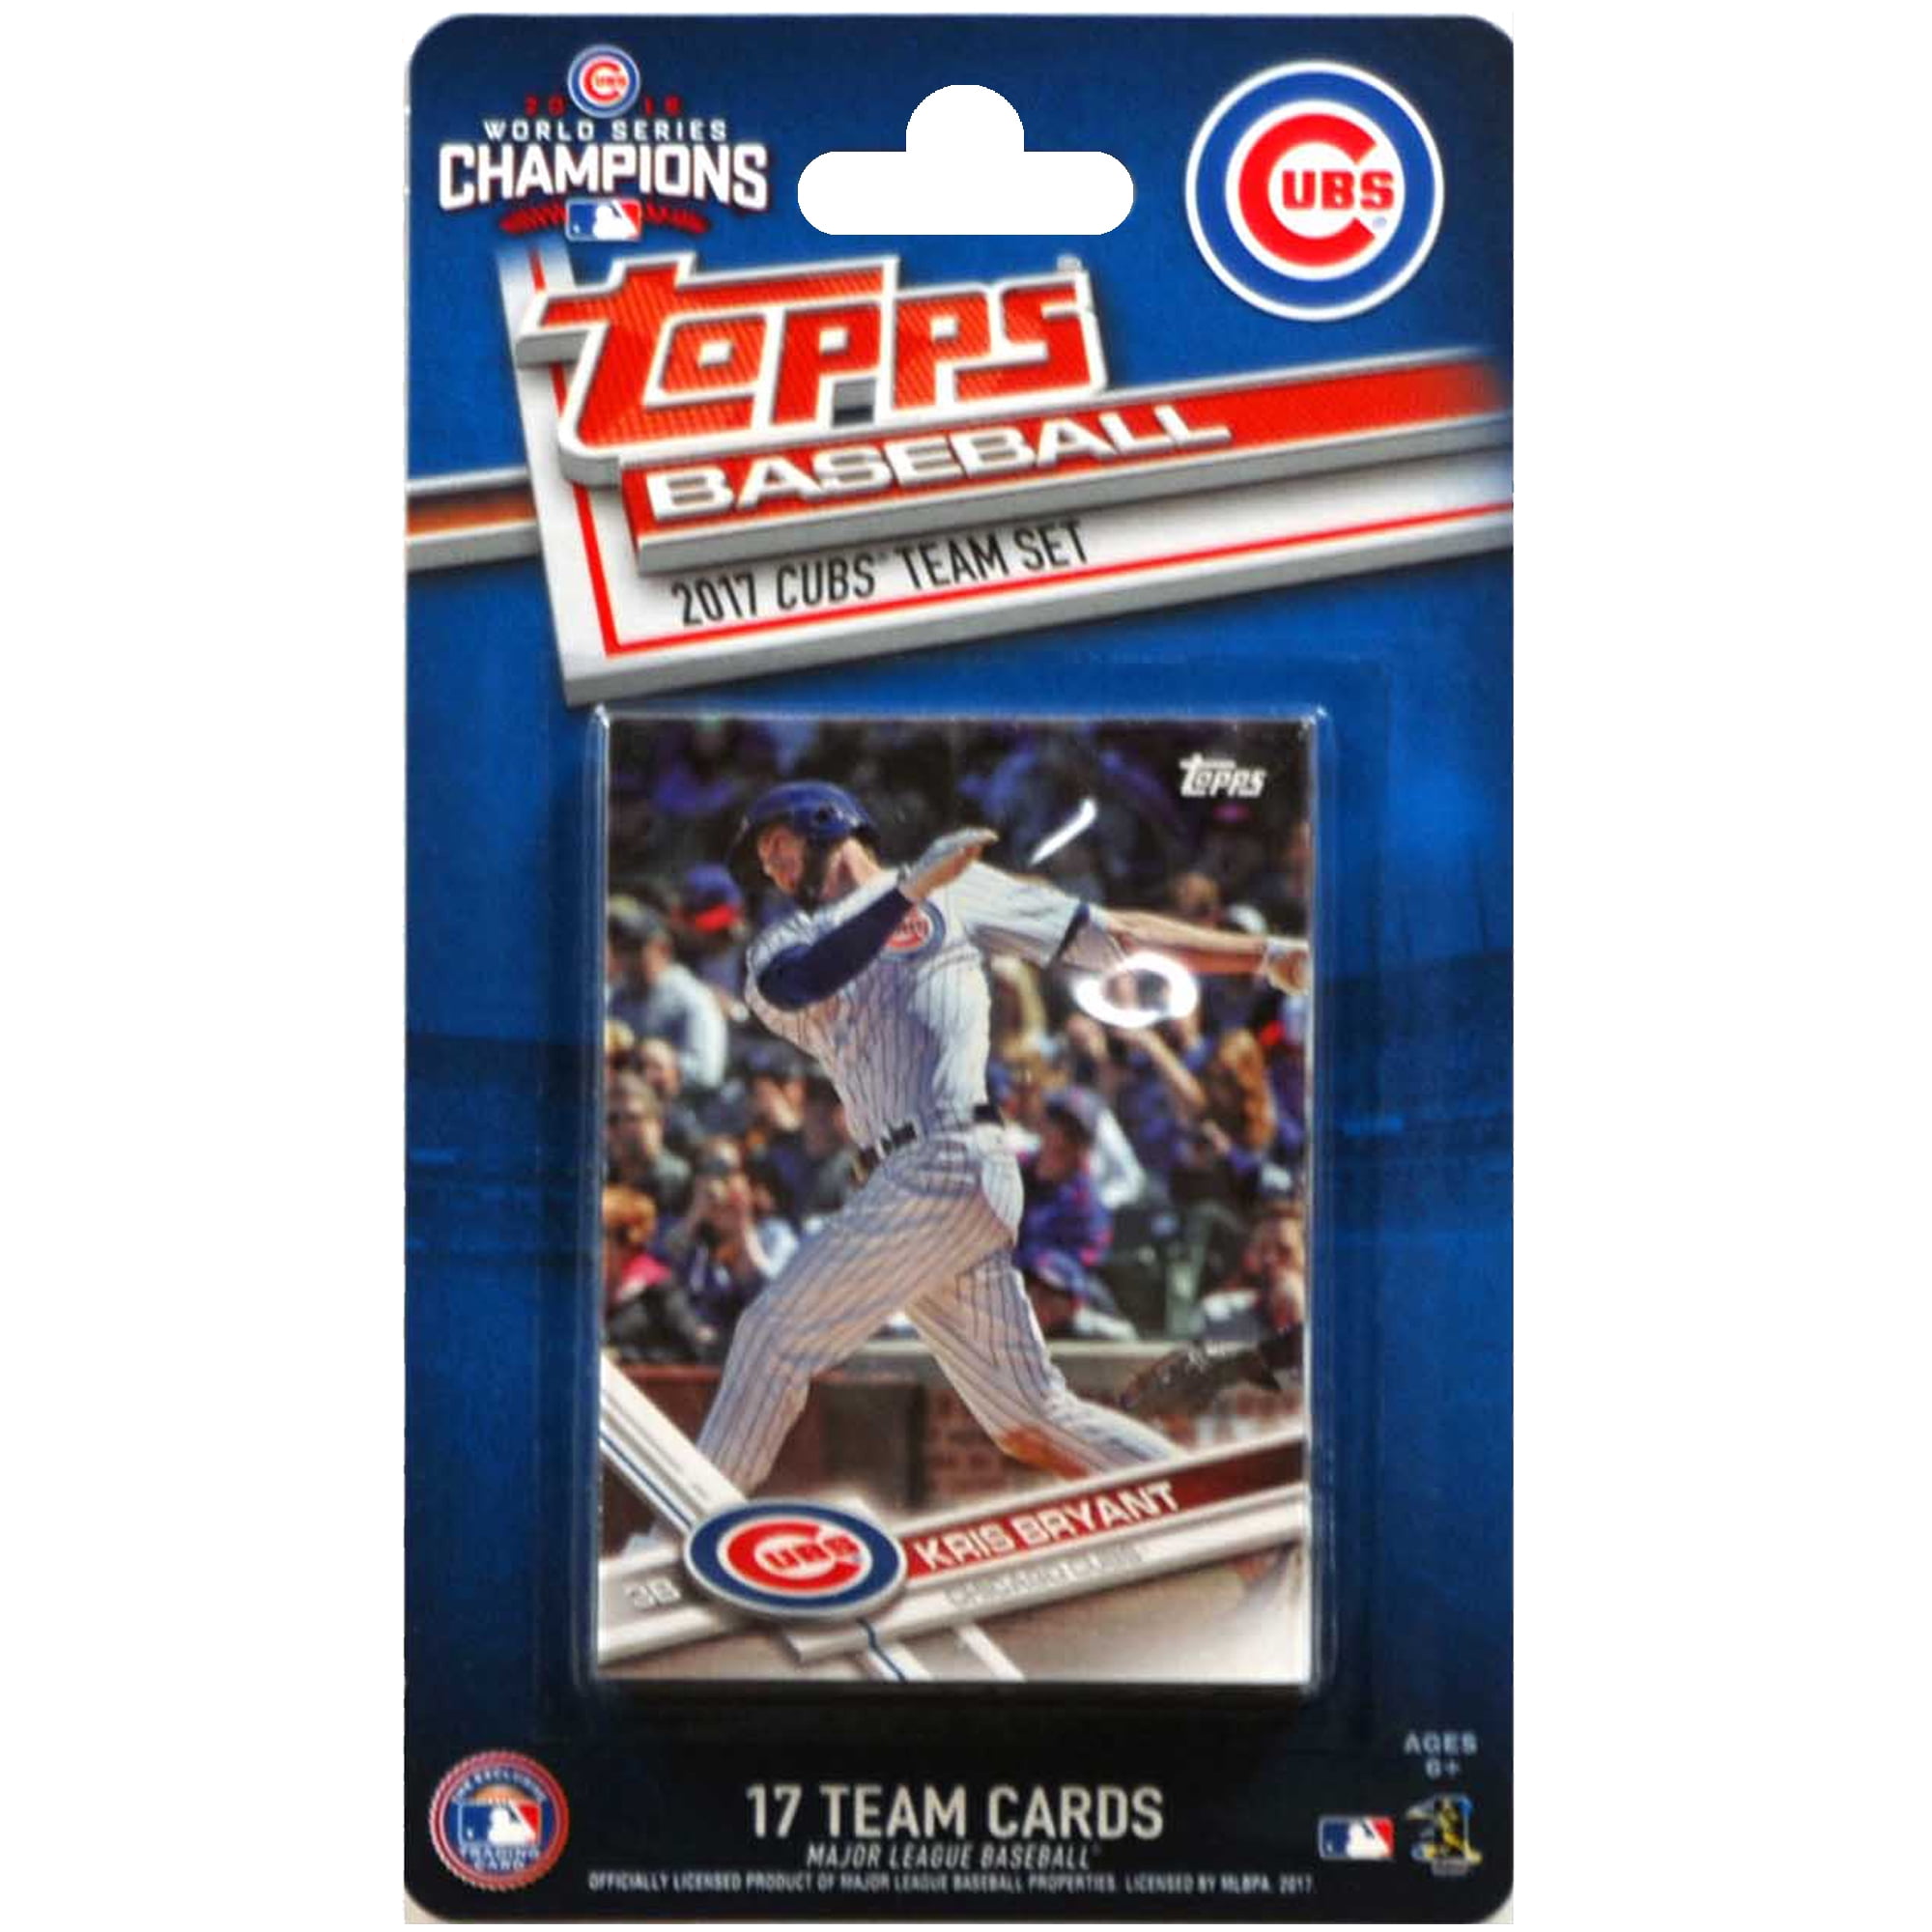 Chicago Cubs 2016/17 Team Set Baseball Trading Cards - No Size